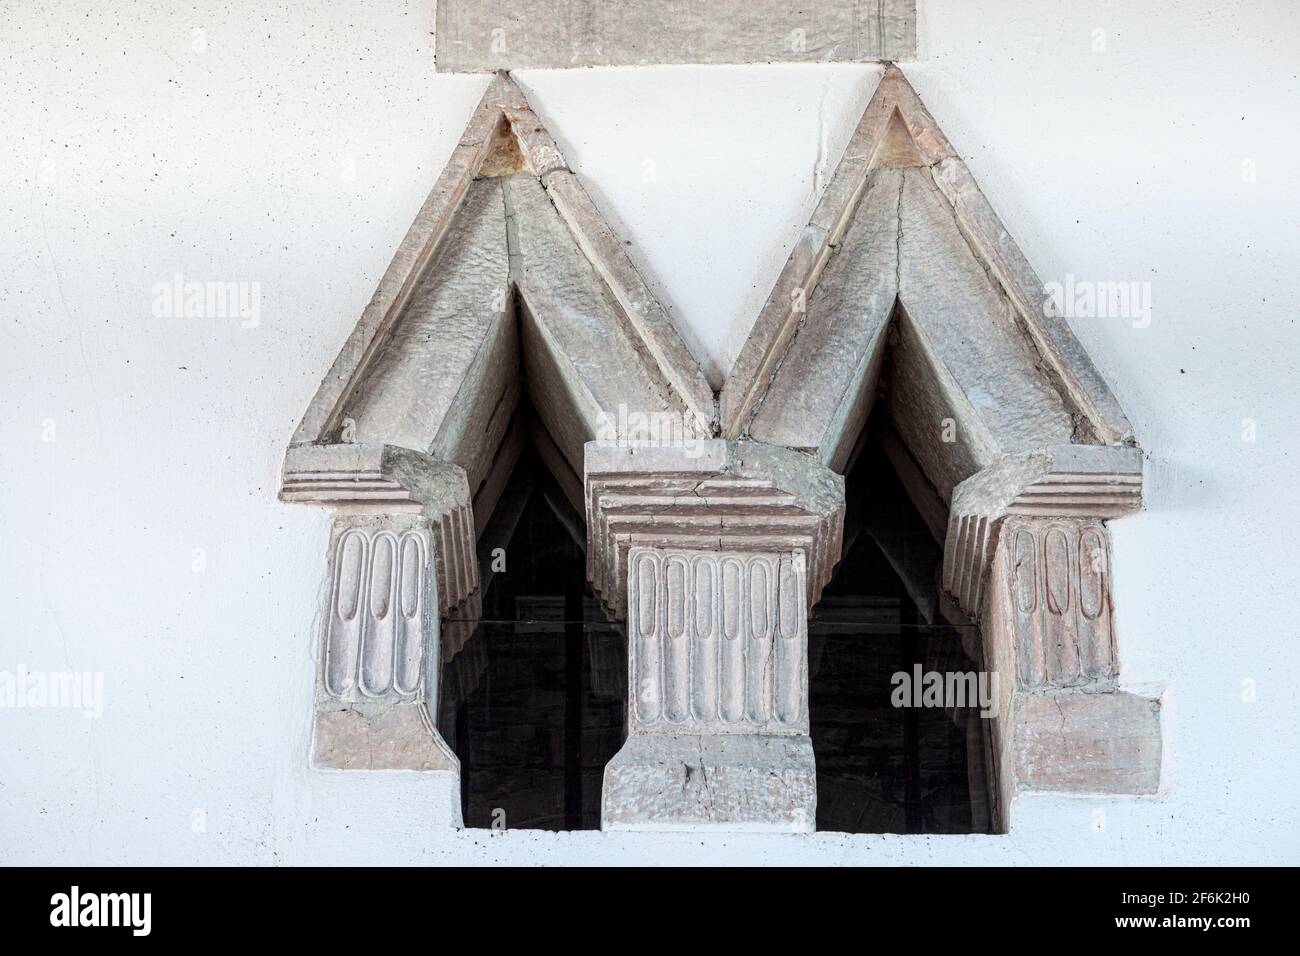 Unique double triangular headed Saxon window in the Anglo-Saxon Priory Church of St Mary dating back to the 9th century at Deerhurst, Gloucestershire Stock Photo